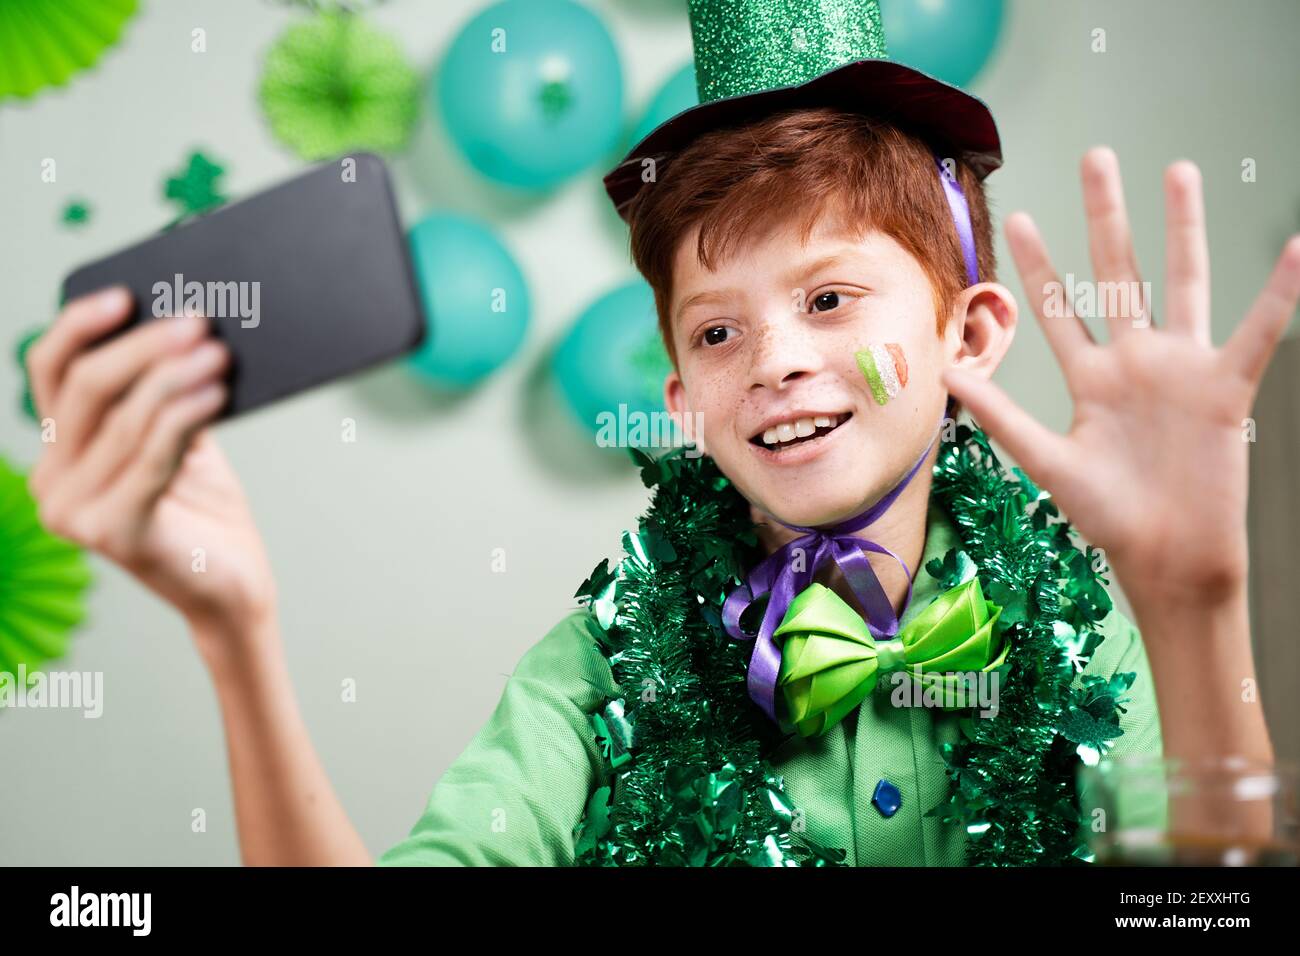 Young kid in green attire celebrating saint patricks day by making video call on mobile phone on decorated background during coronavirus covid-19 Stock Photo